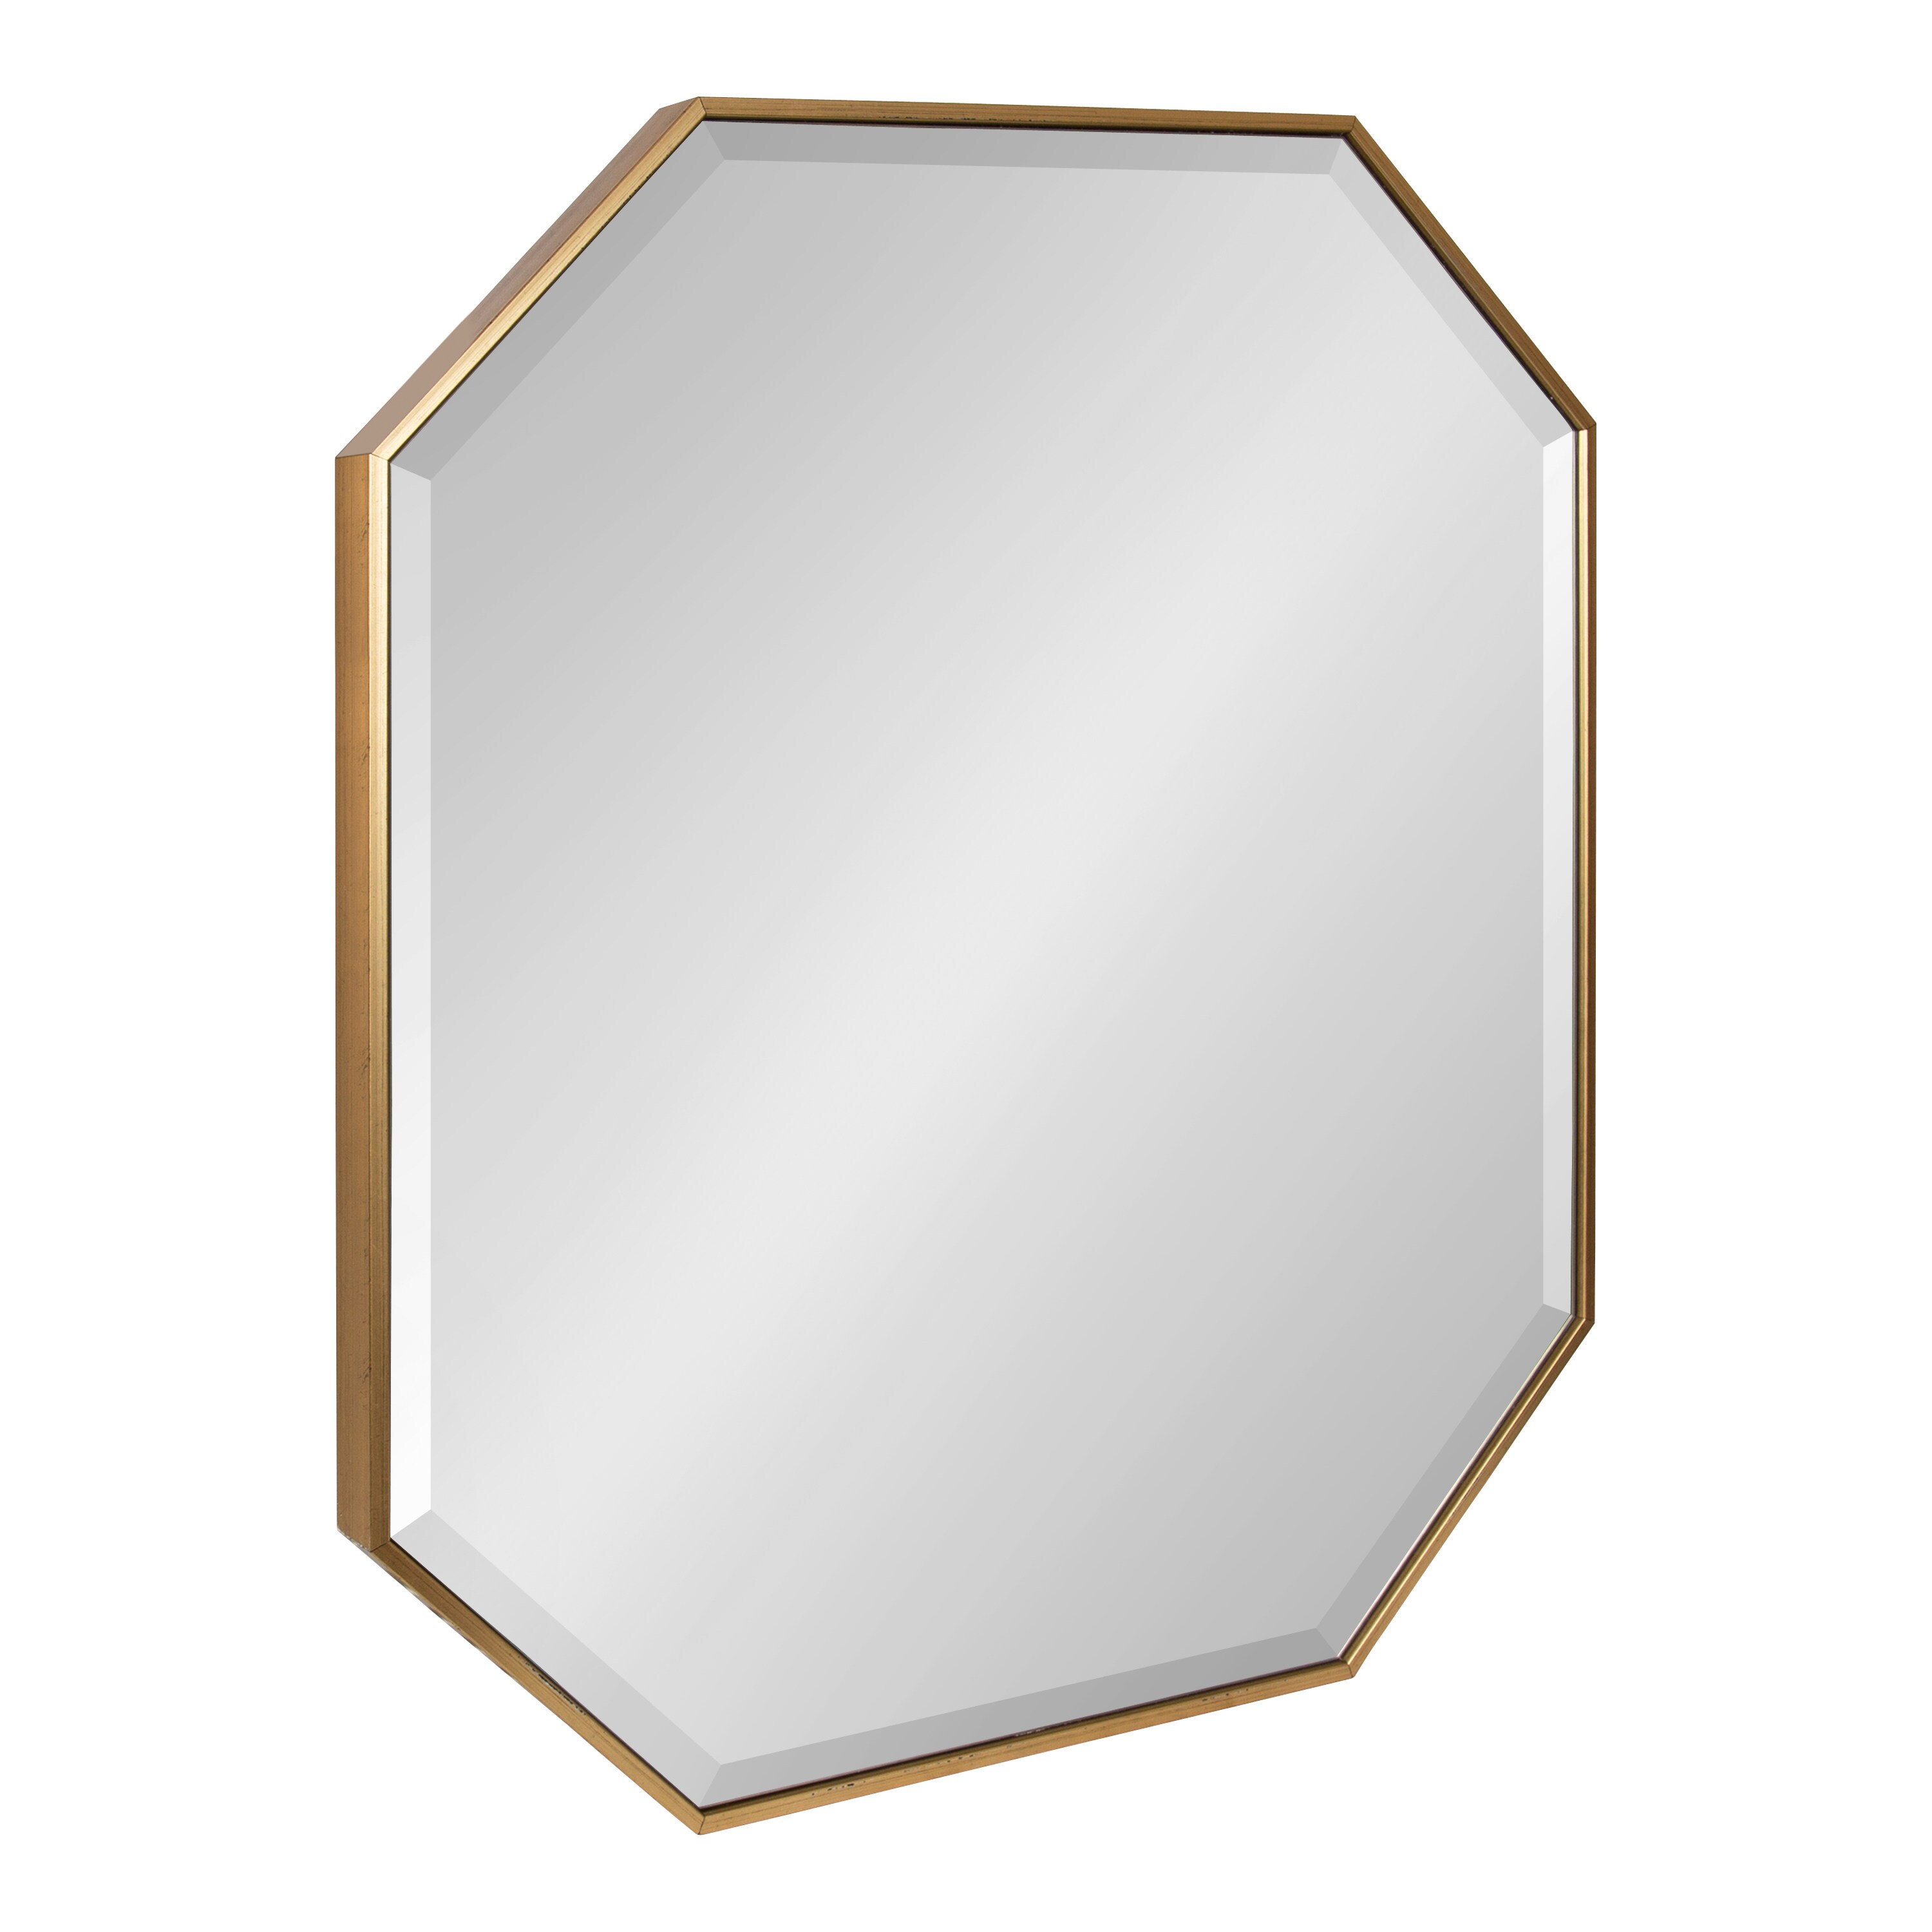 Kate and Laurel Rhodes 25.98-in W x 30.12-in H Octagon Gold 